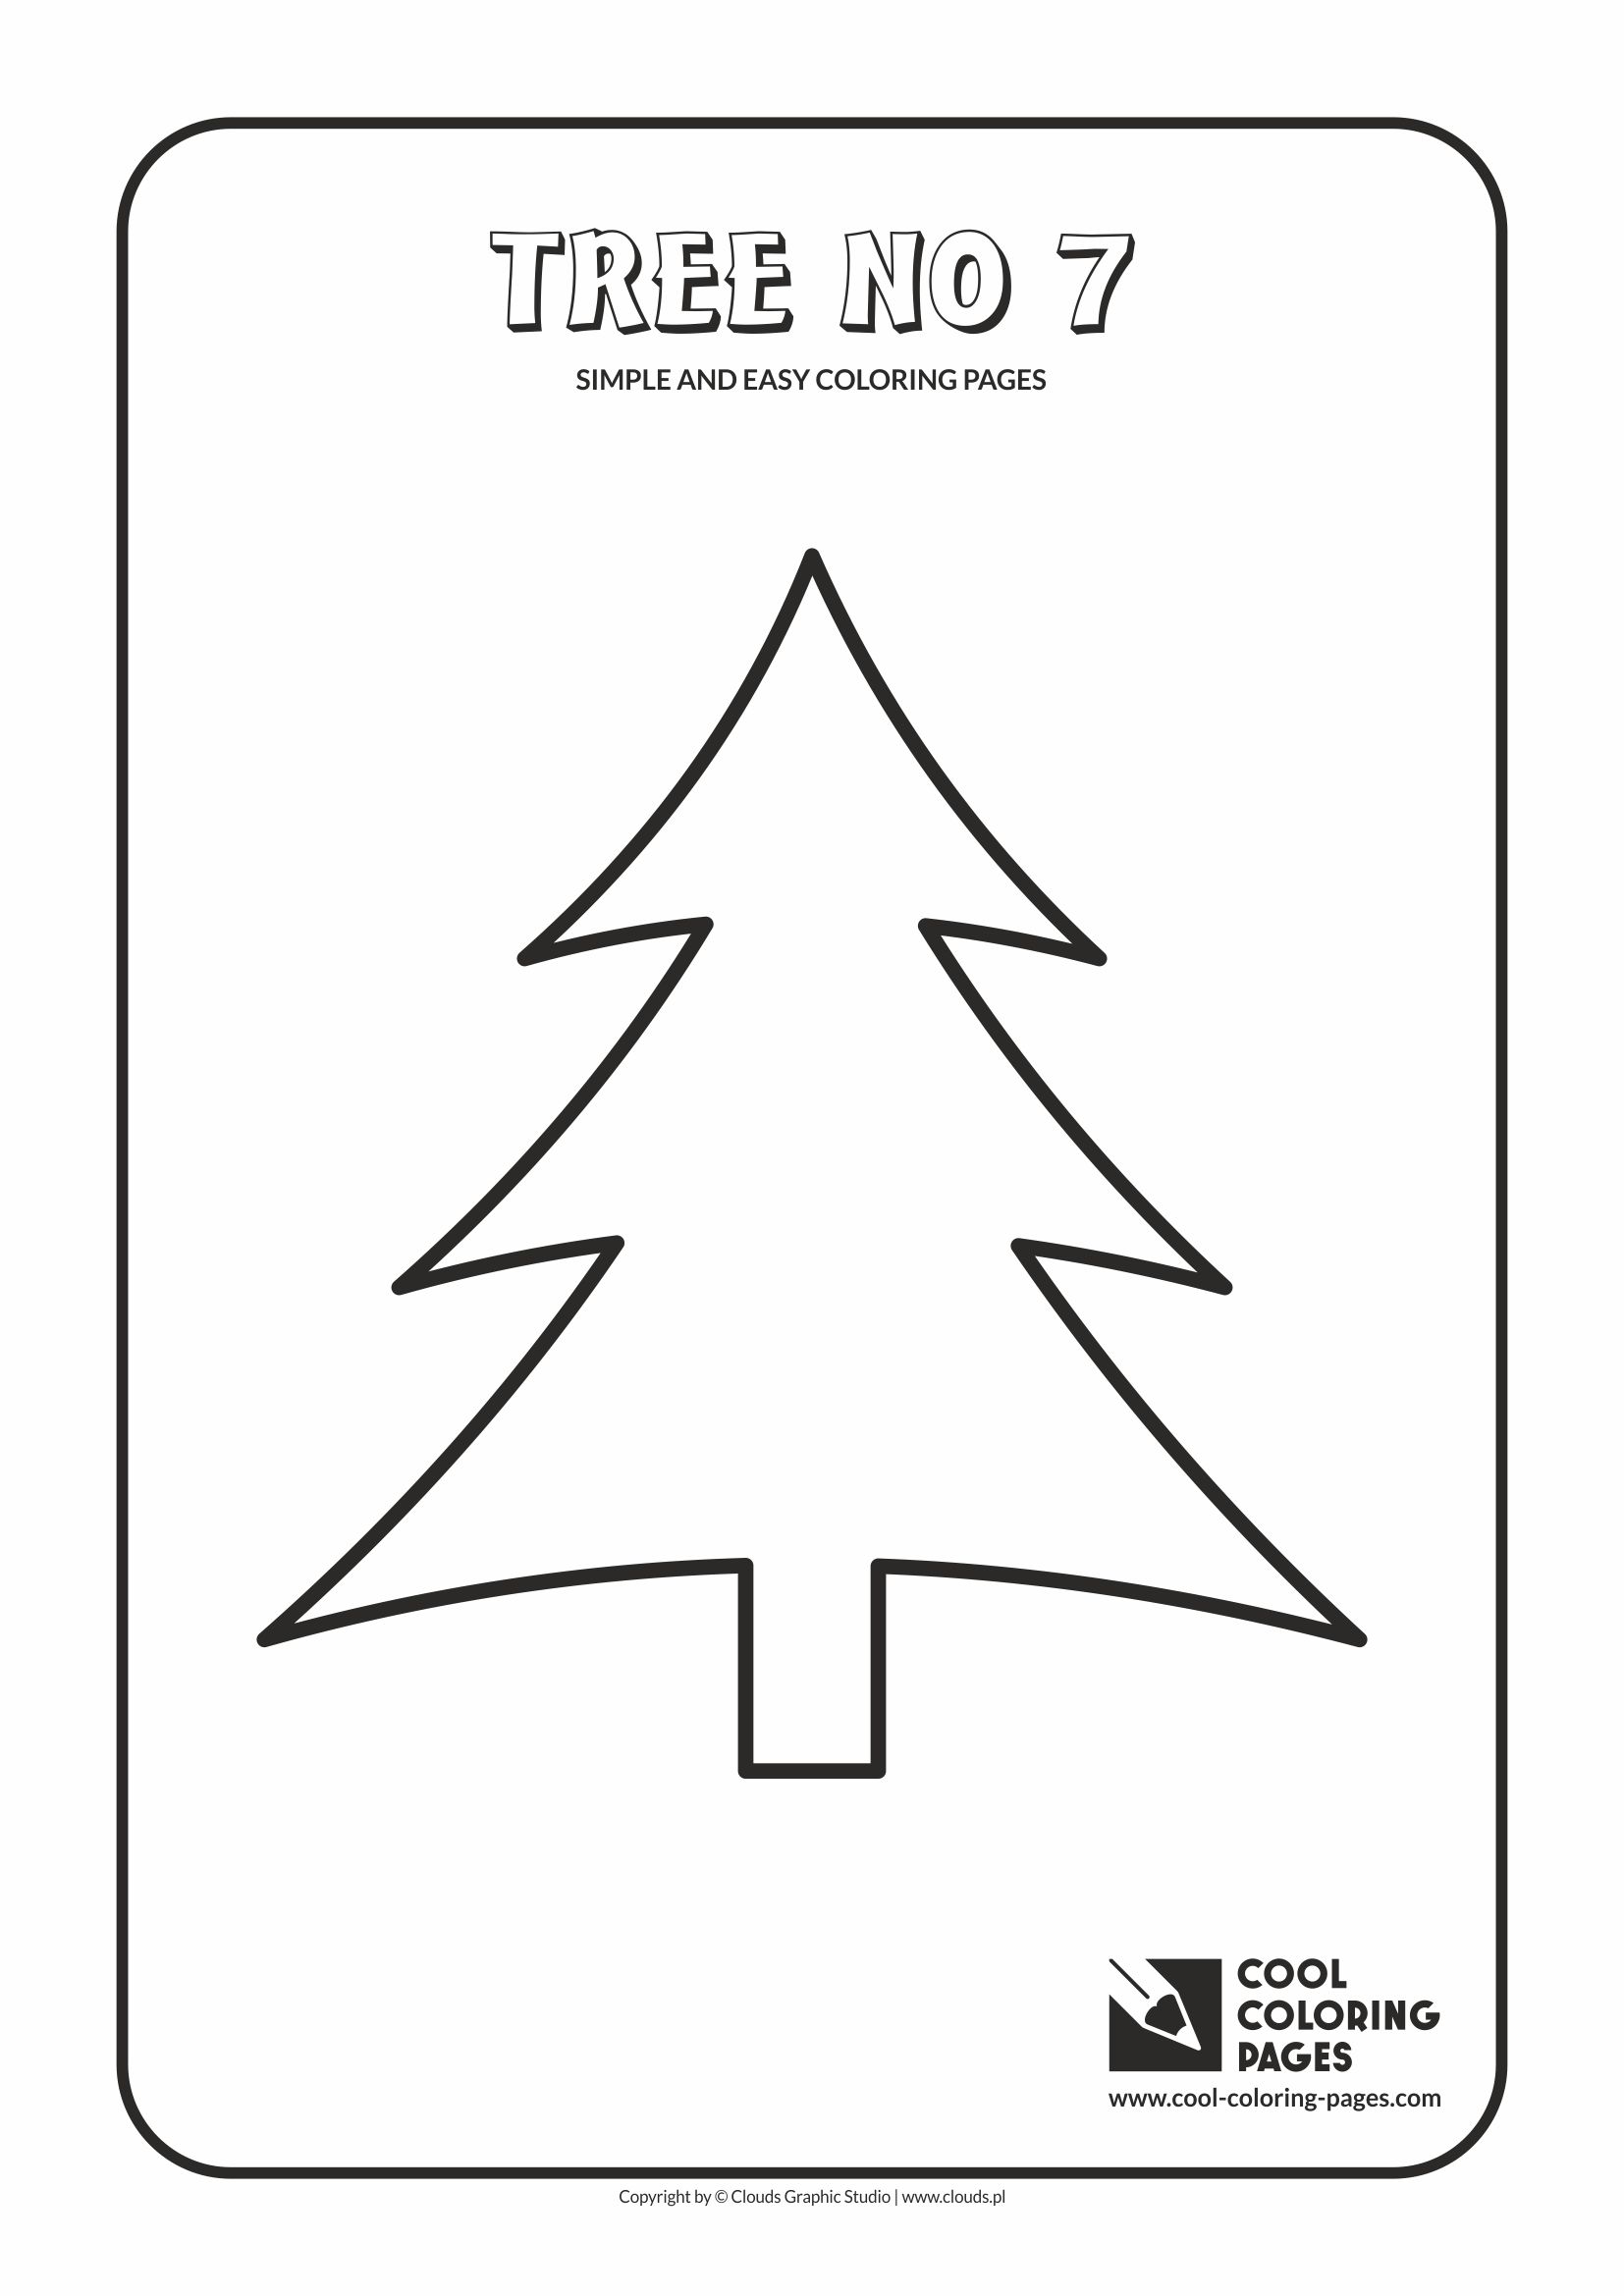 Simple and easy coloring pages for toddlers - Tree no 7